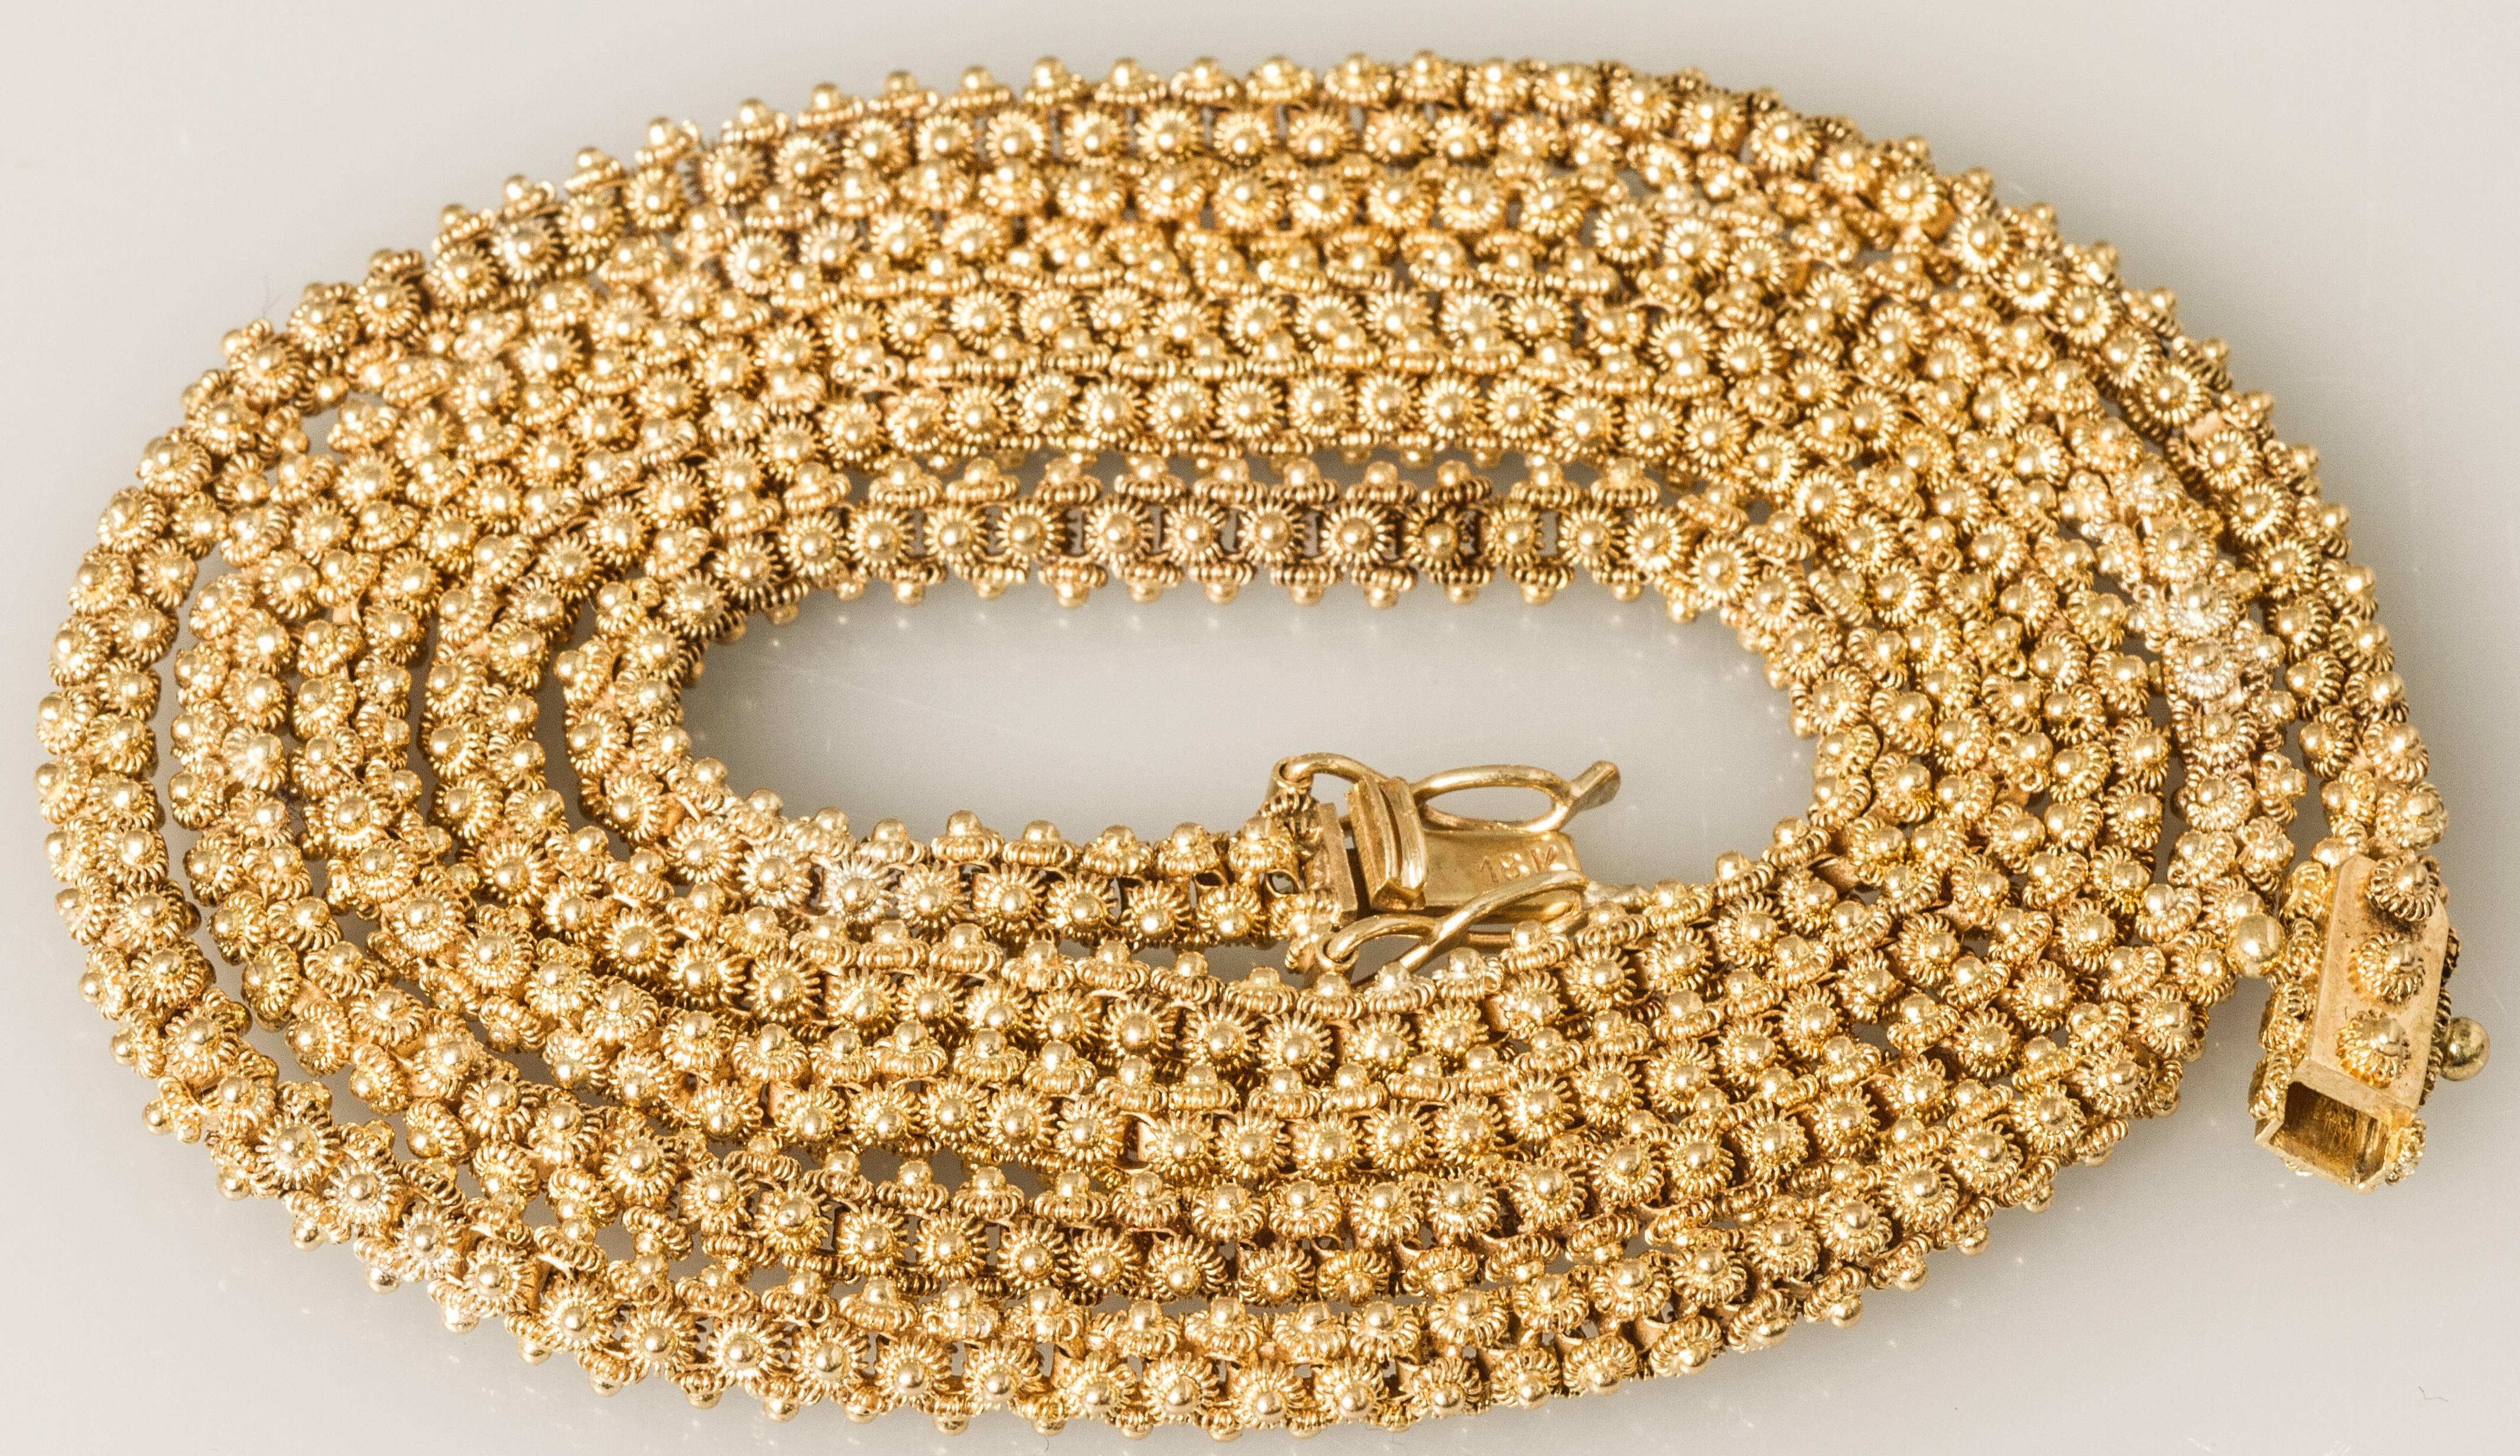 This necklace has a gorgeous link! The beautifully crafted links are adorned on four sides with stylized flower shaped granulated gold elements. It is thirty inches long and can be wrapped around the neck twice to form a gold choker.
There are two